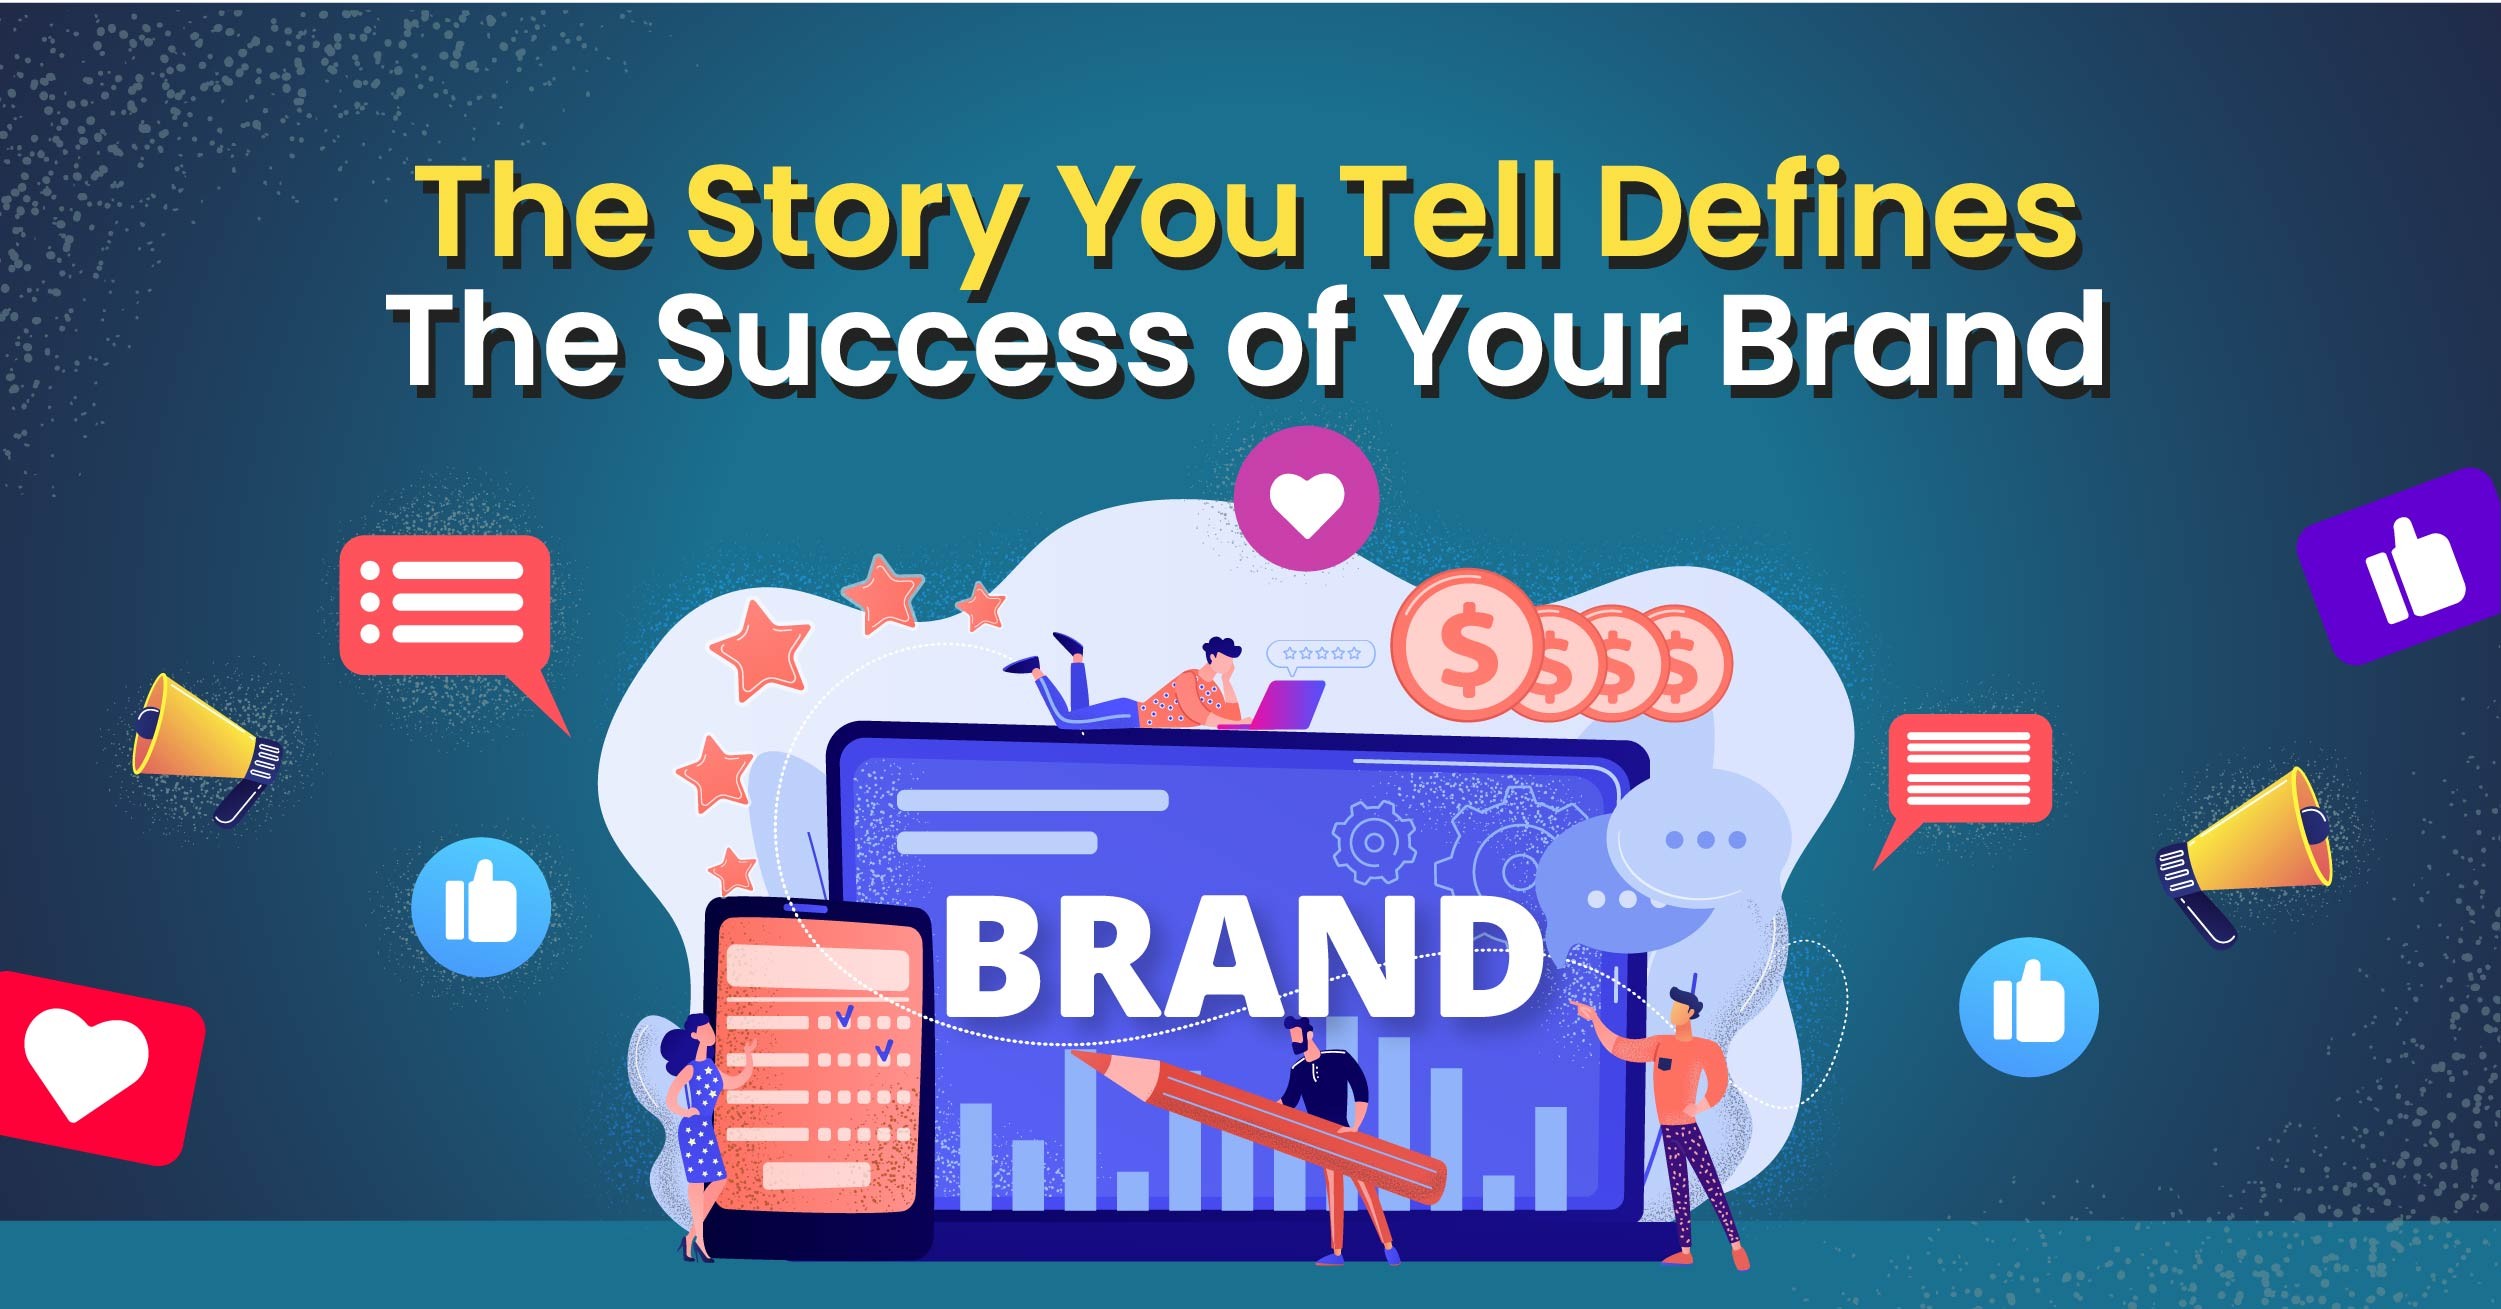 The Story You Tell Defines The Success of Your Brand